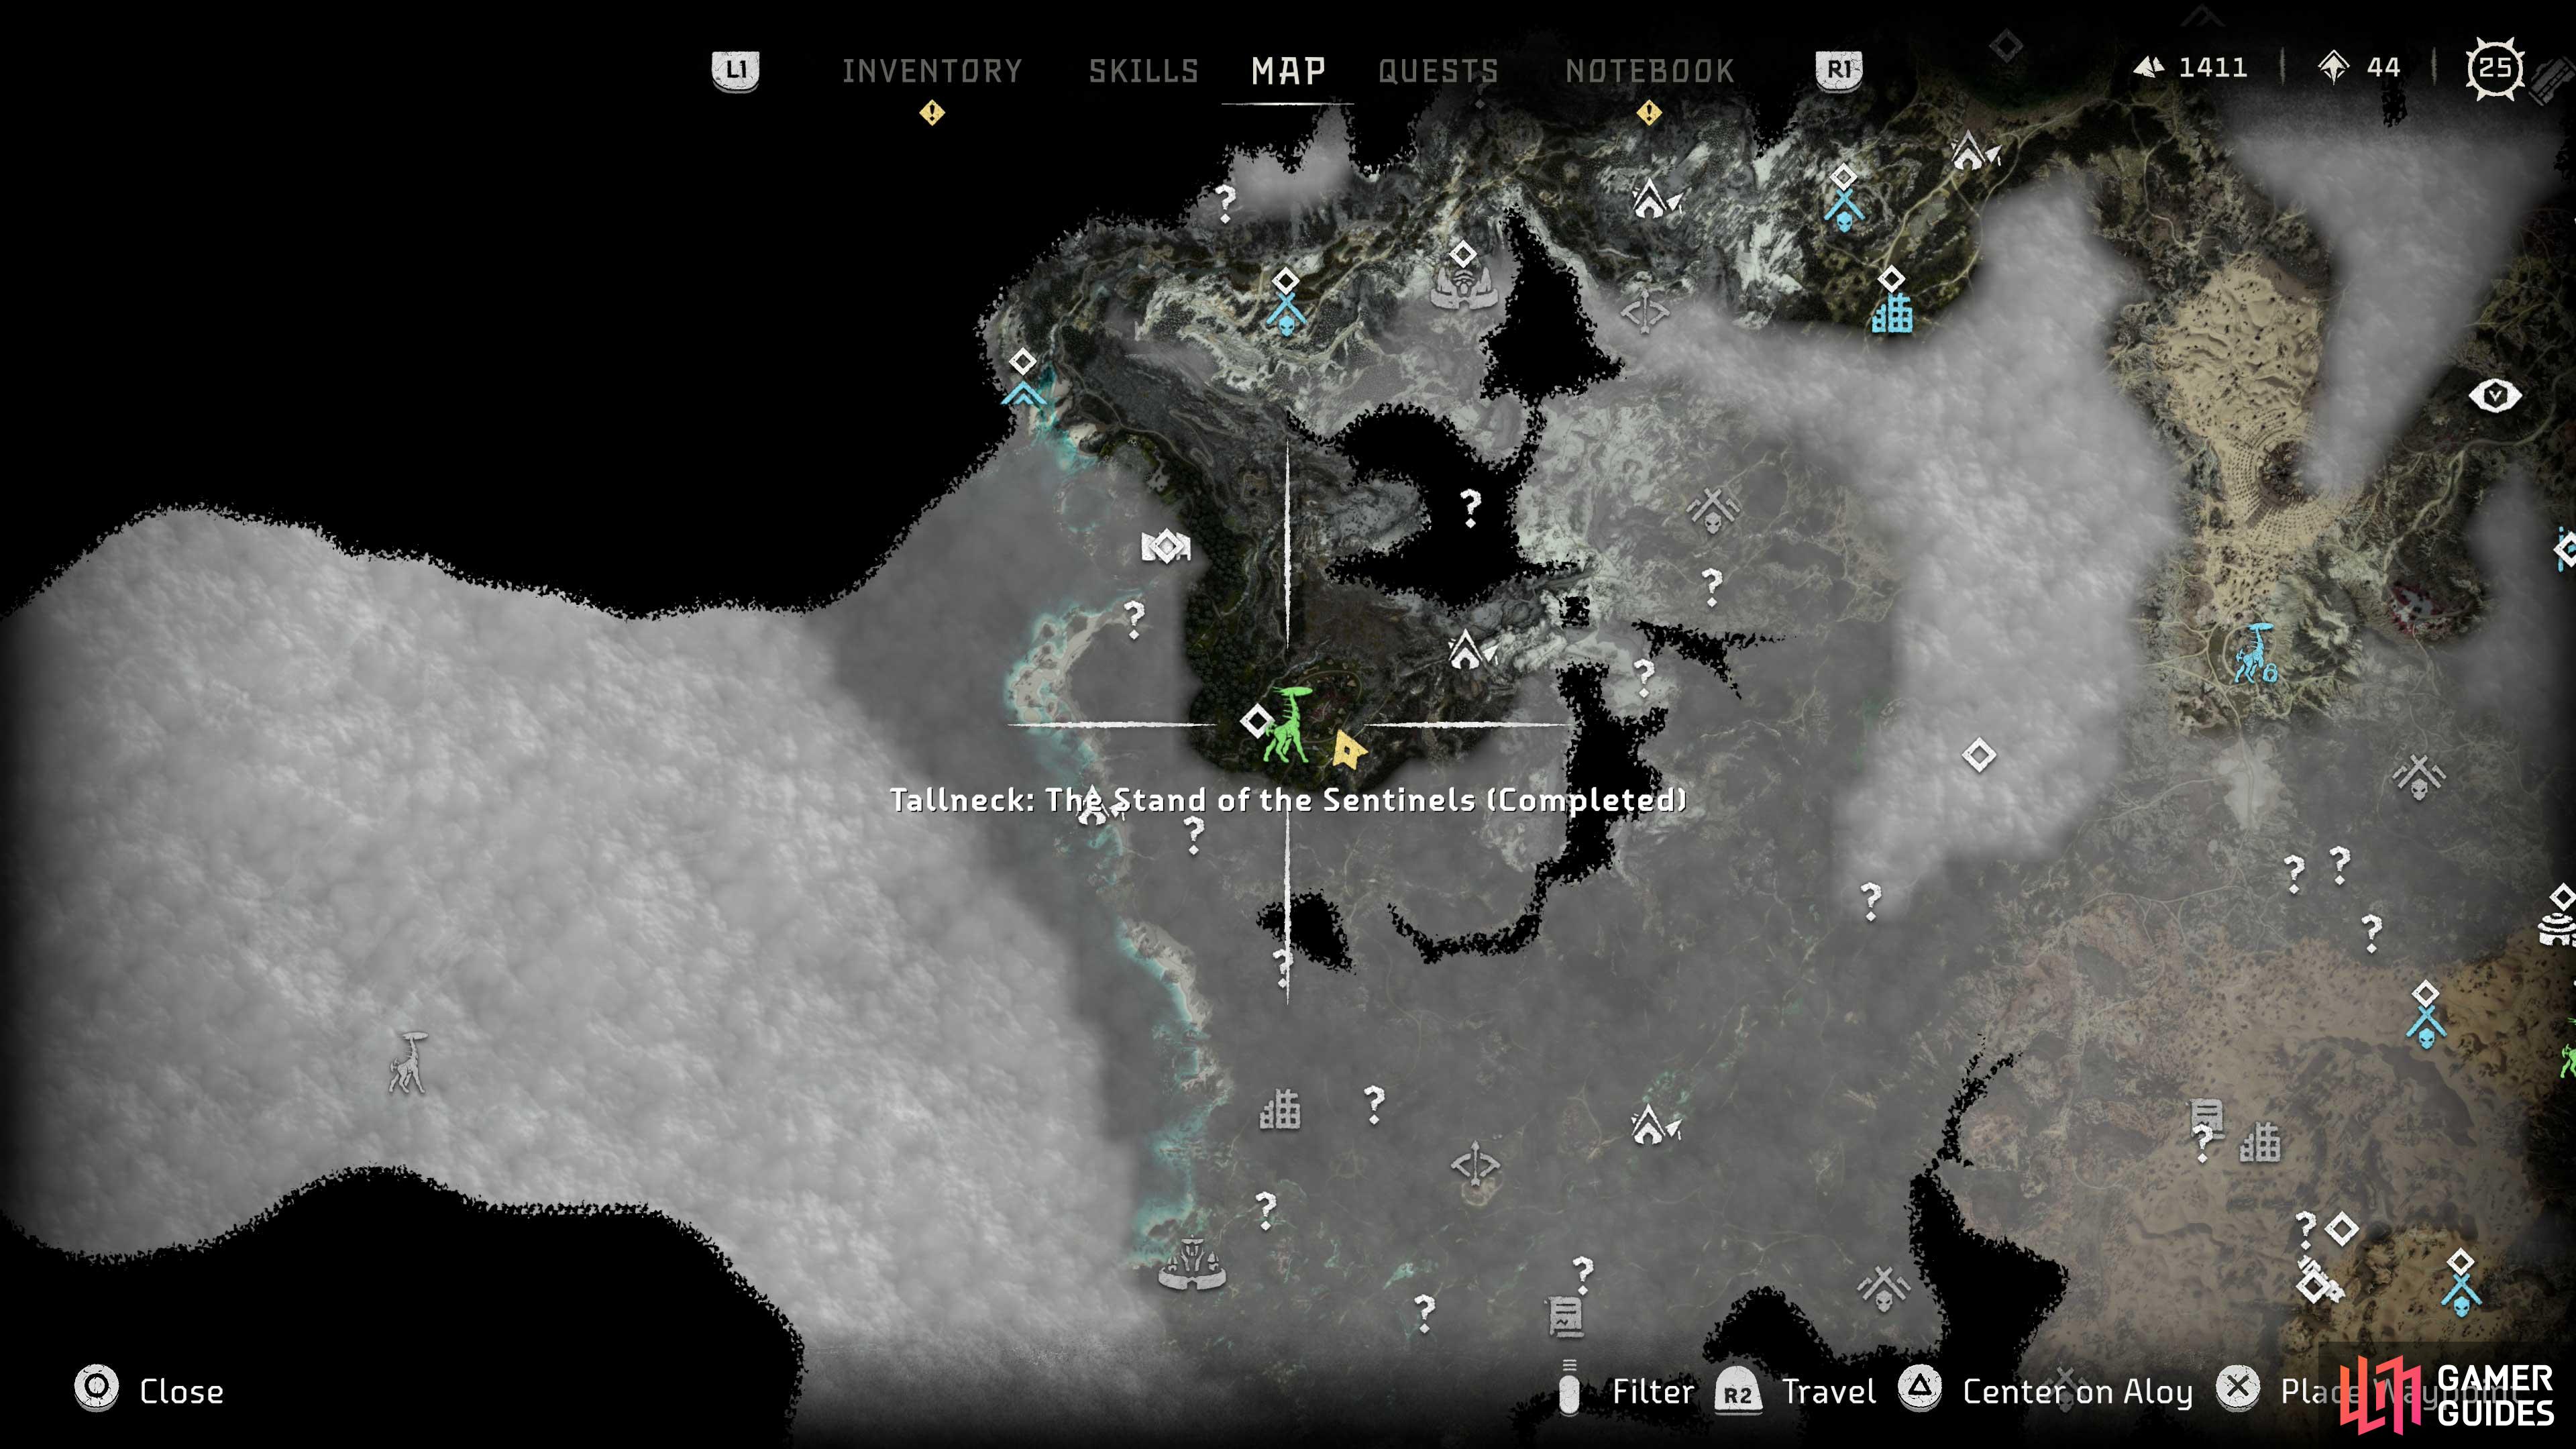 The location of the Tallneck: The Stand of the Sentinels activity.